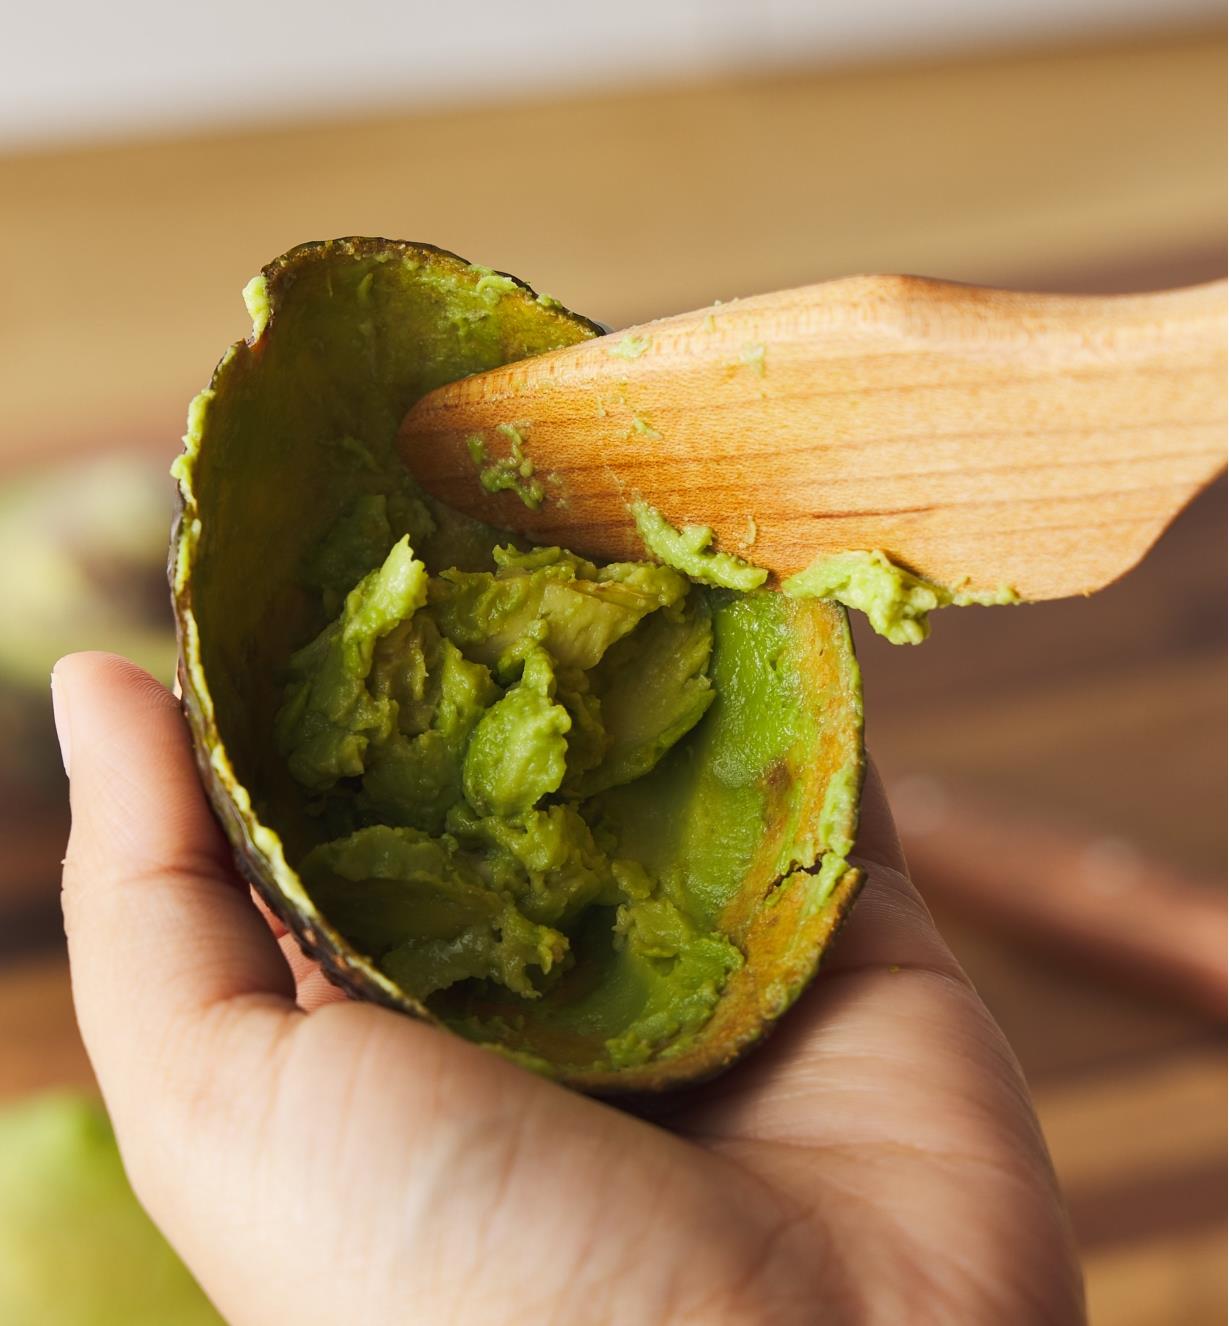 Scraping the inside of an avocado skin with a Better Spreader